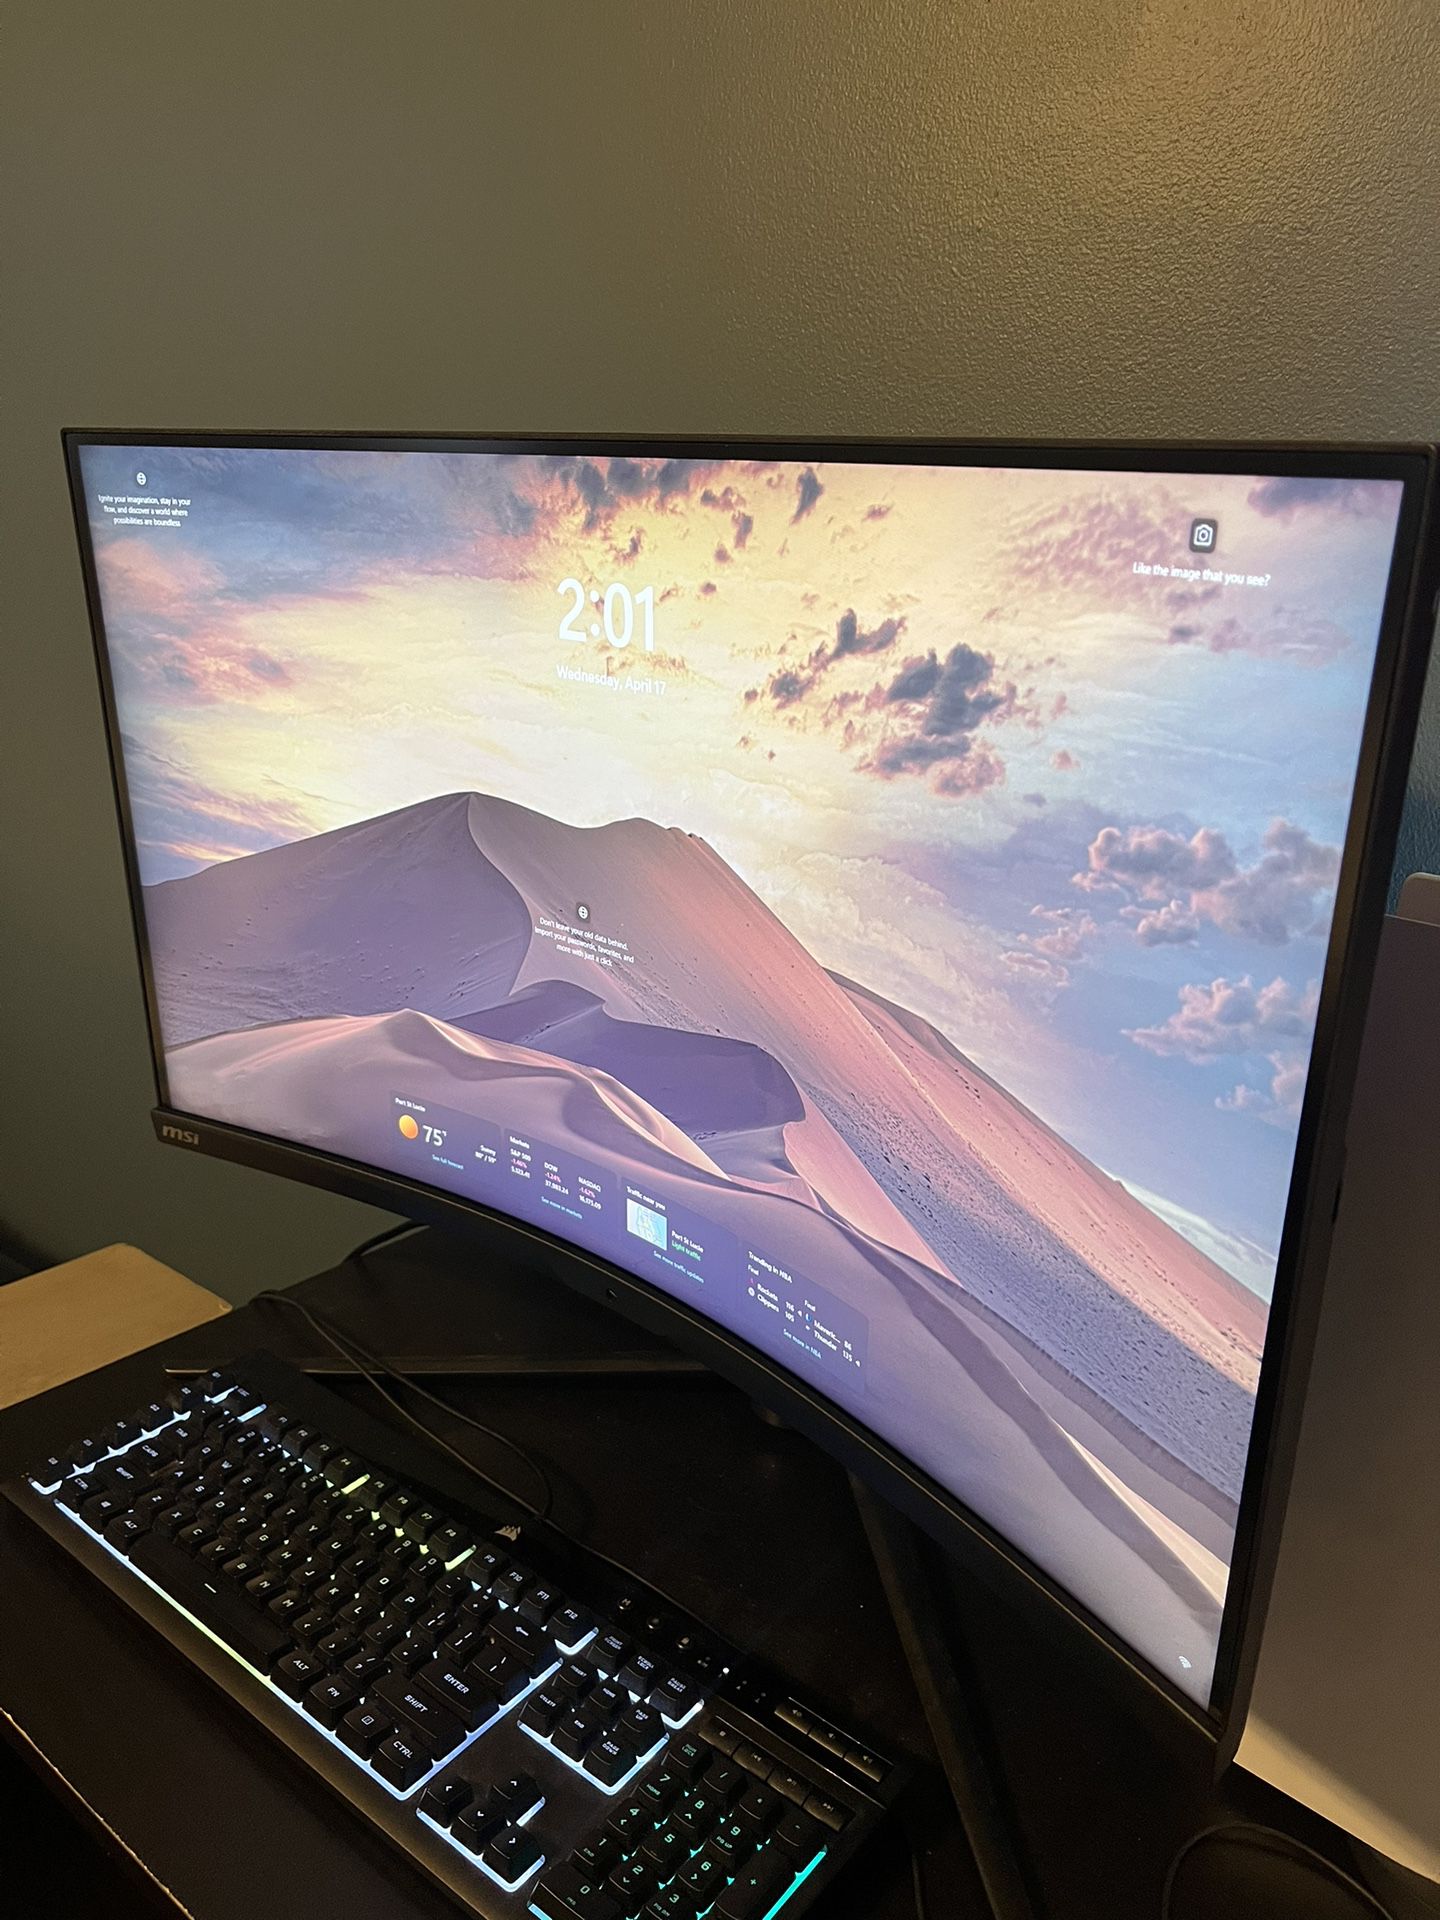 MSI Curved Gaming Monitor 32”